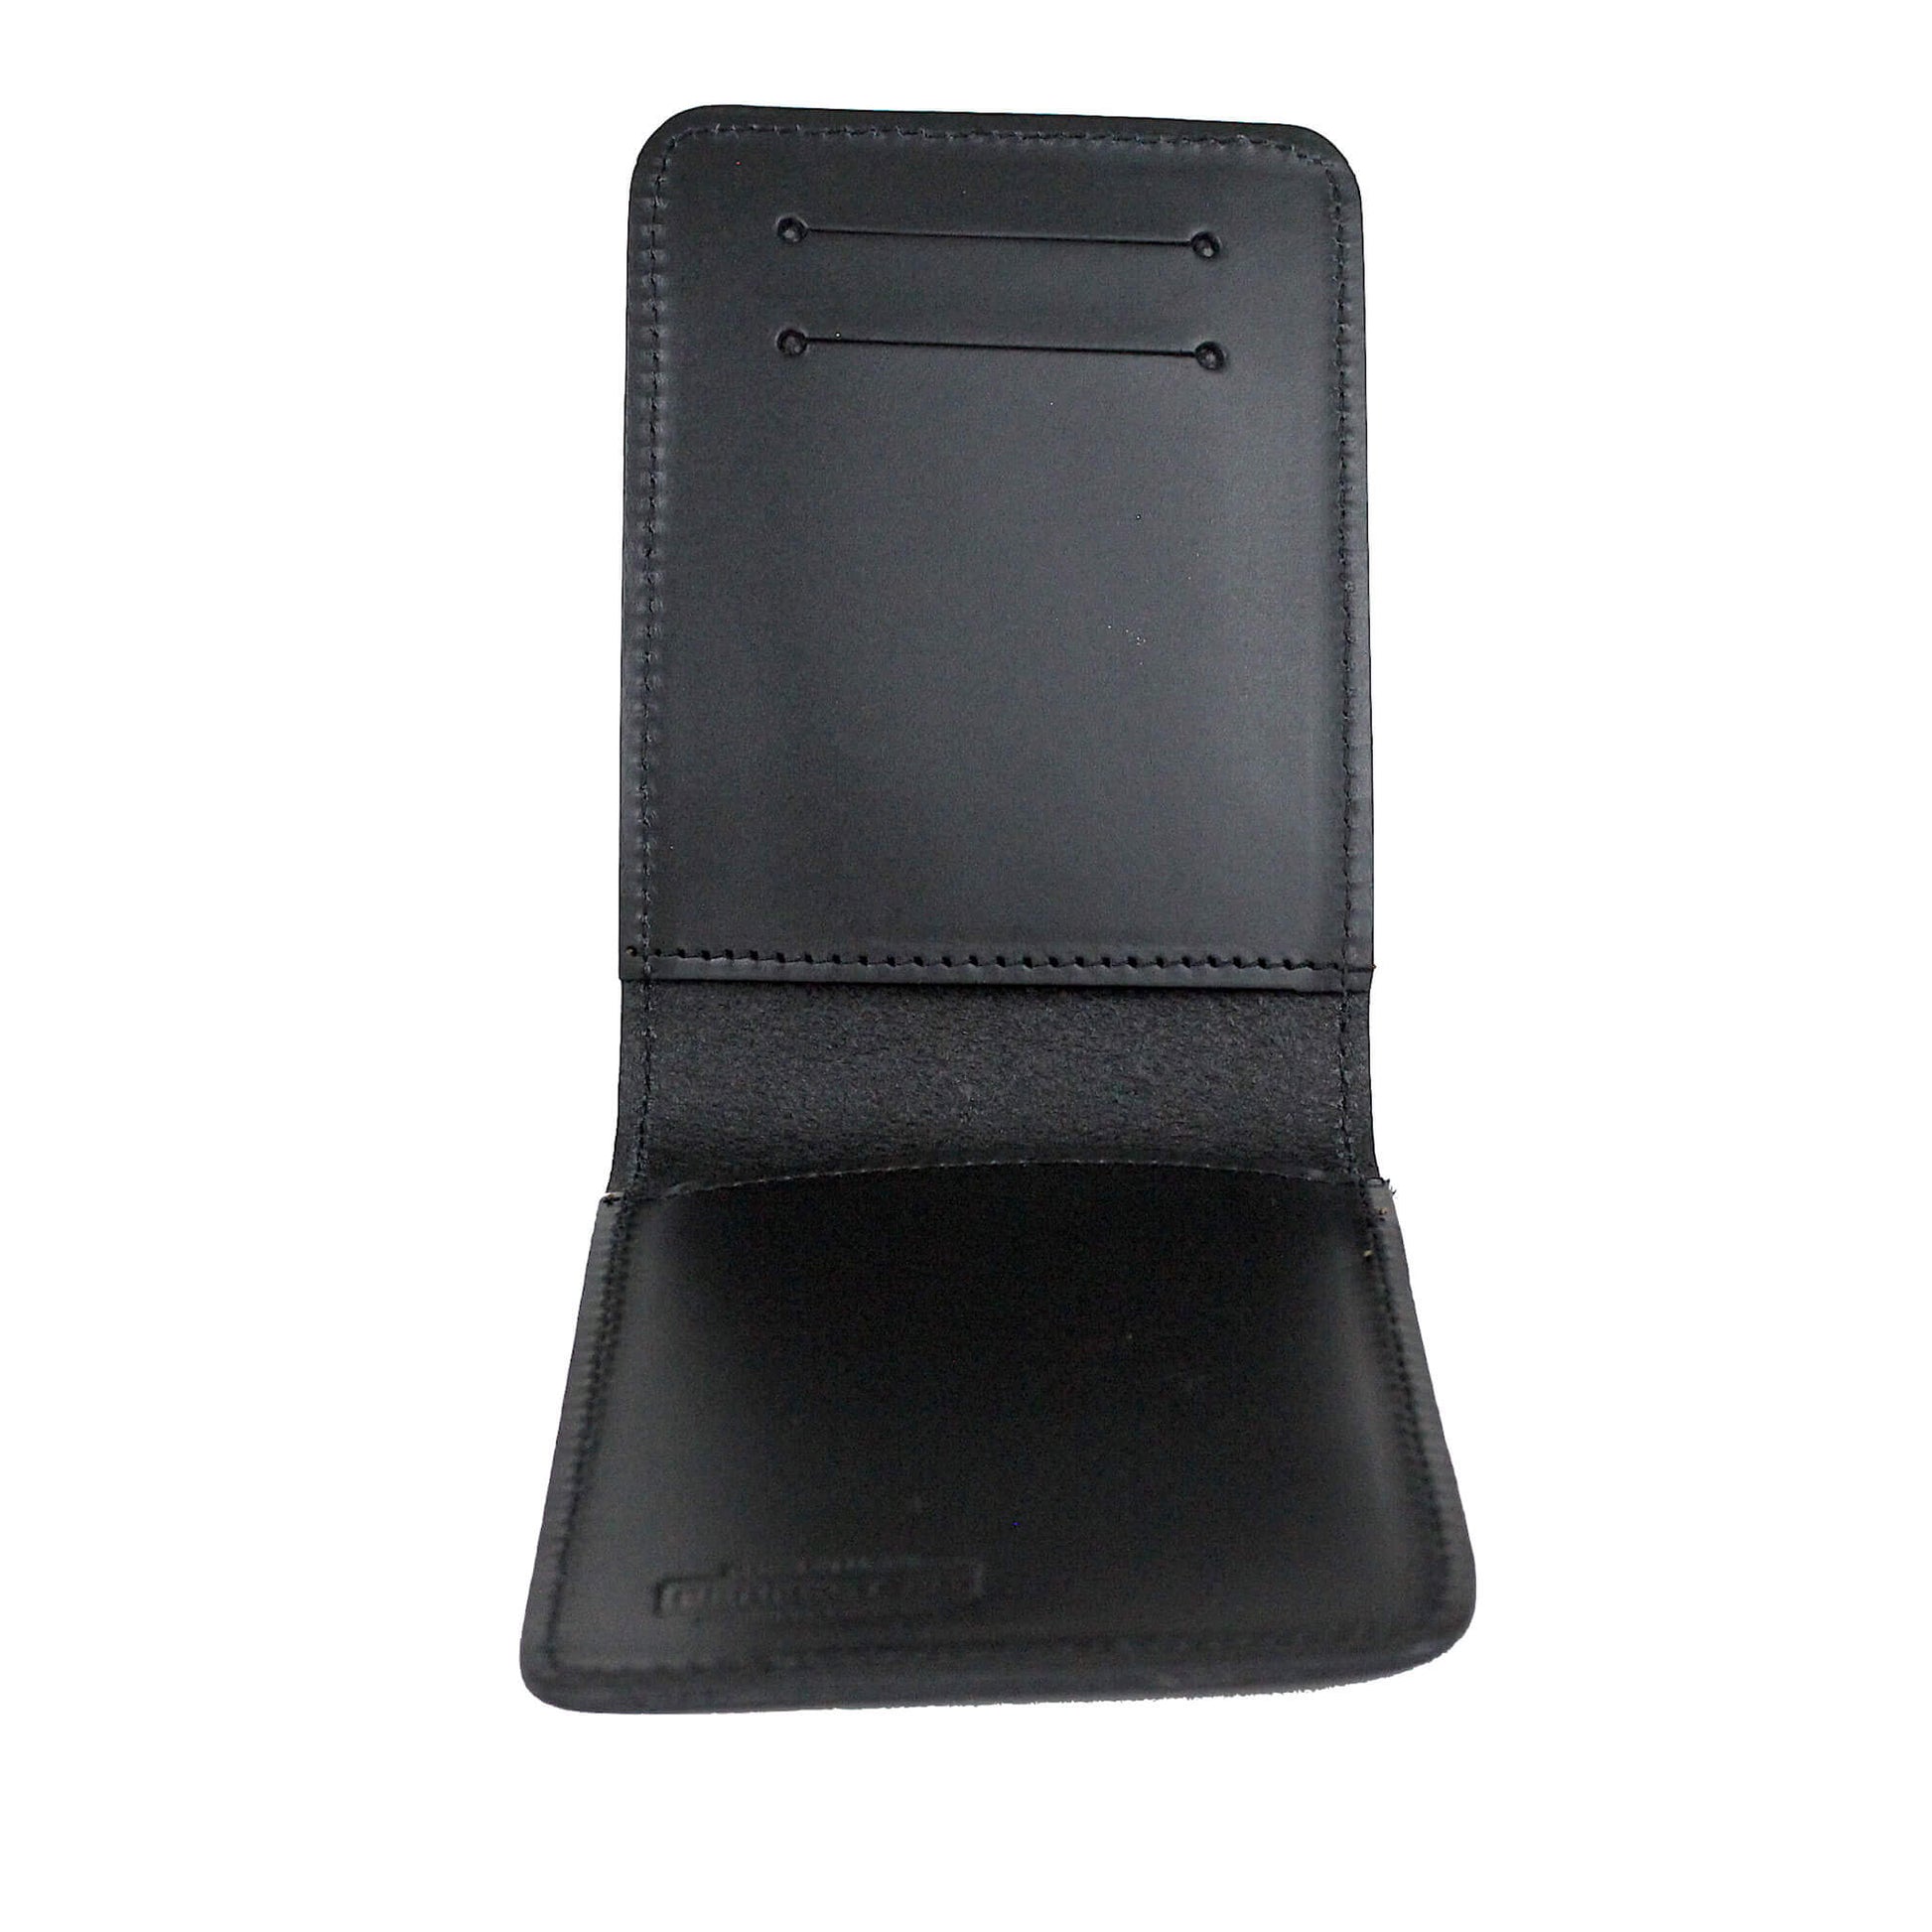 Securite Publique Westmount Public Safety Notebook Cover-Perfect Fit-911 Duty Gear Canada